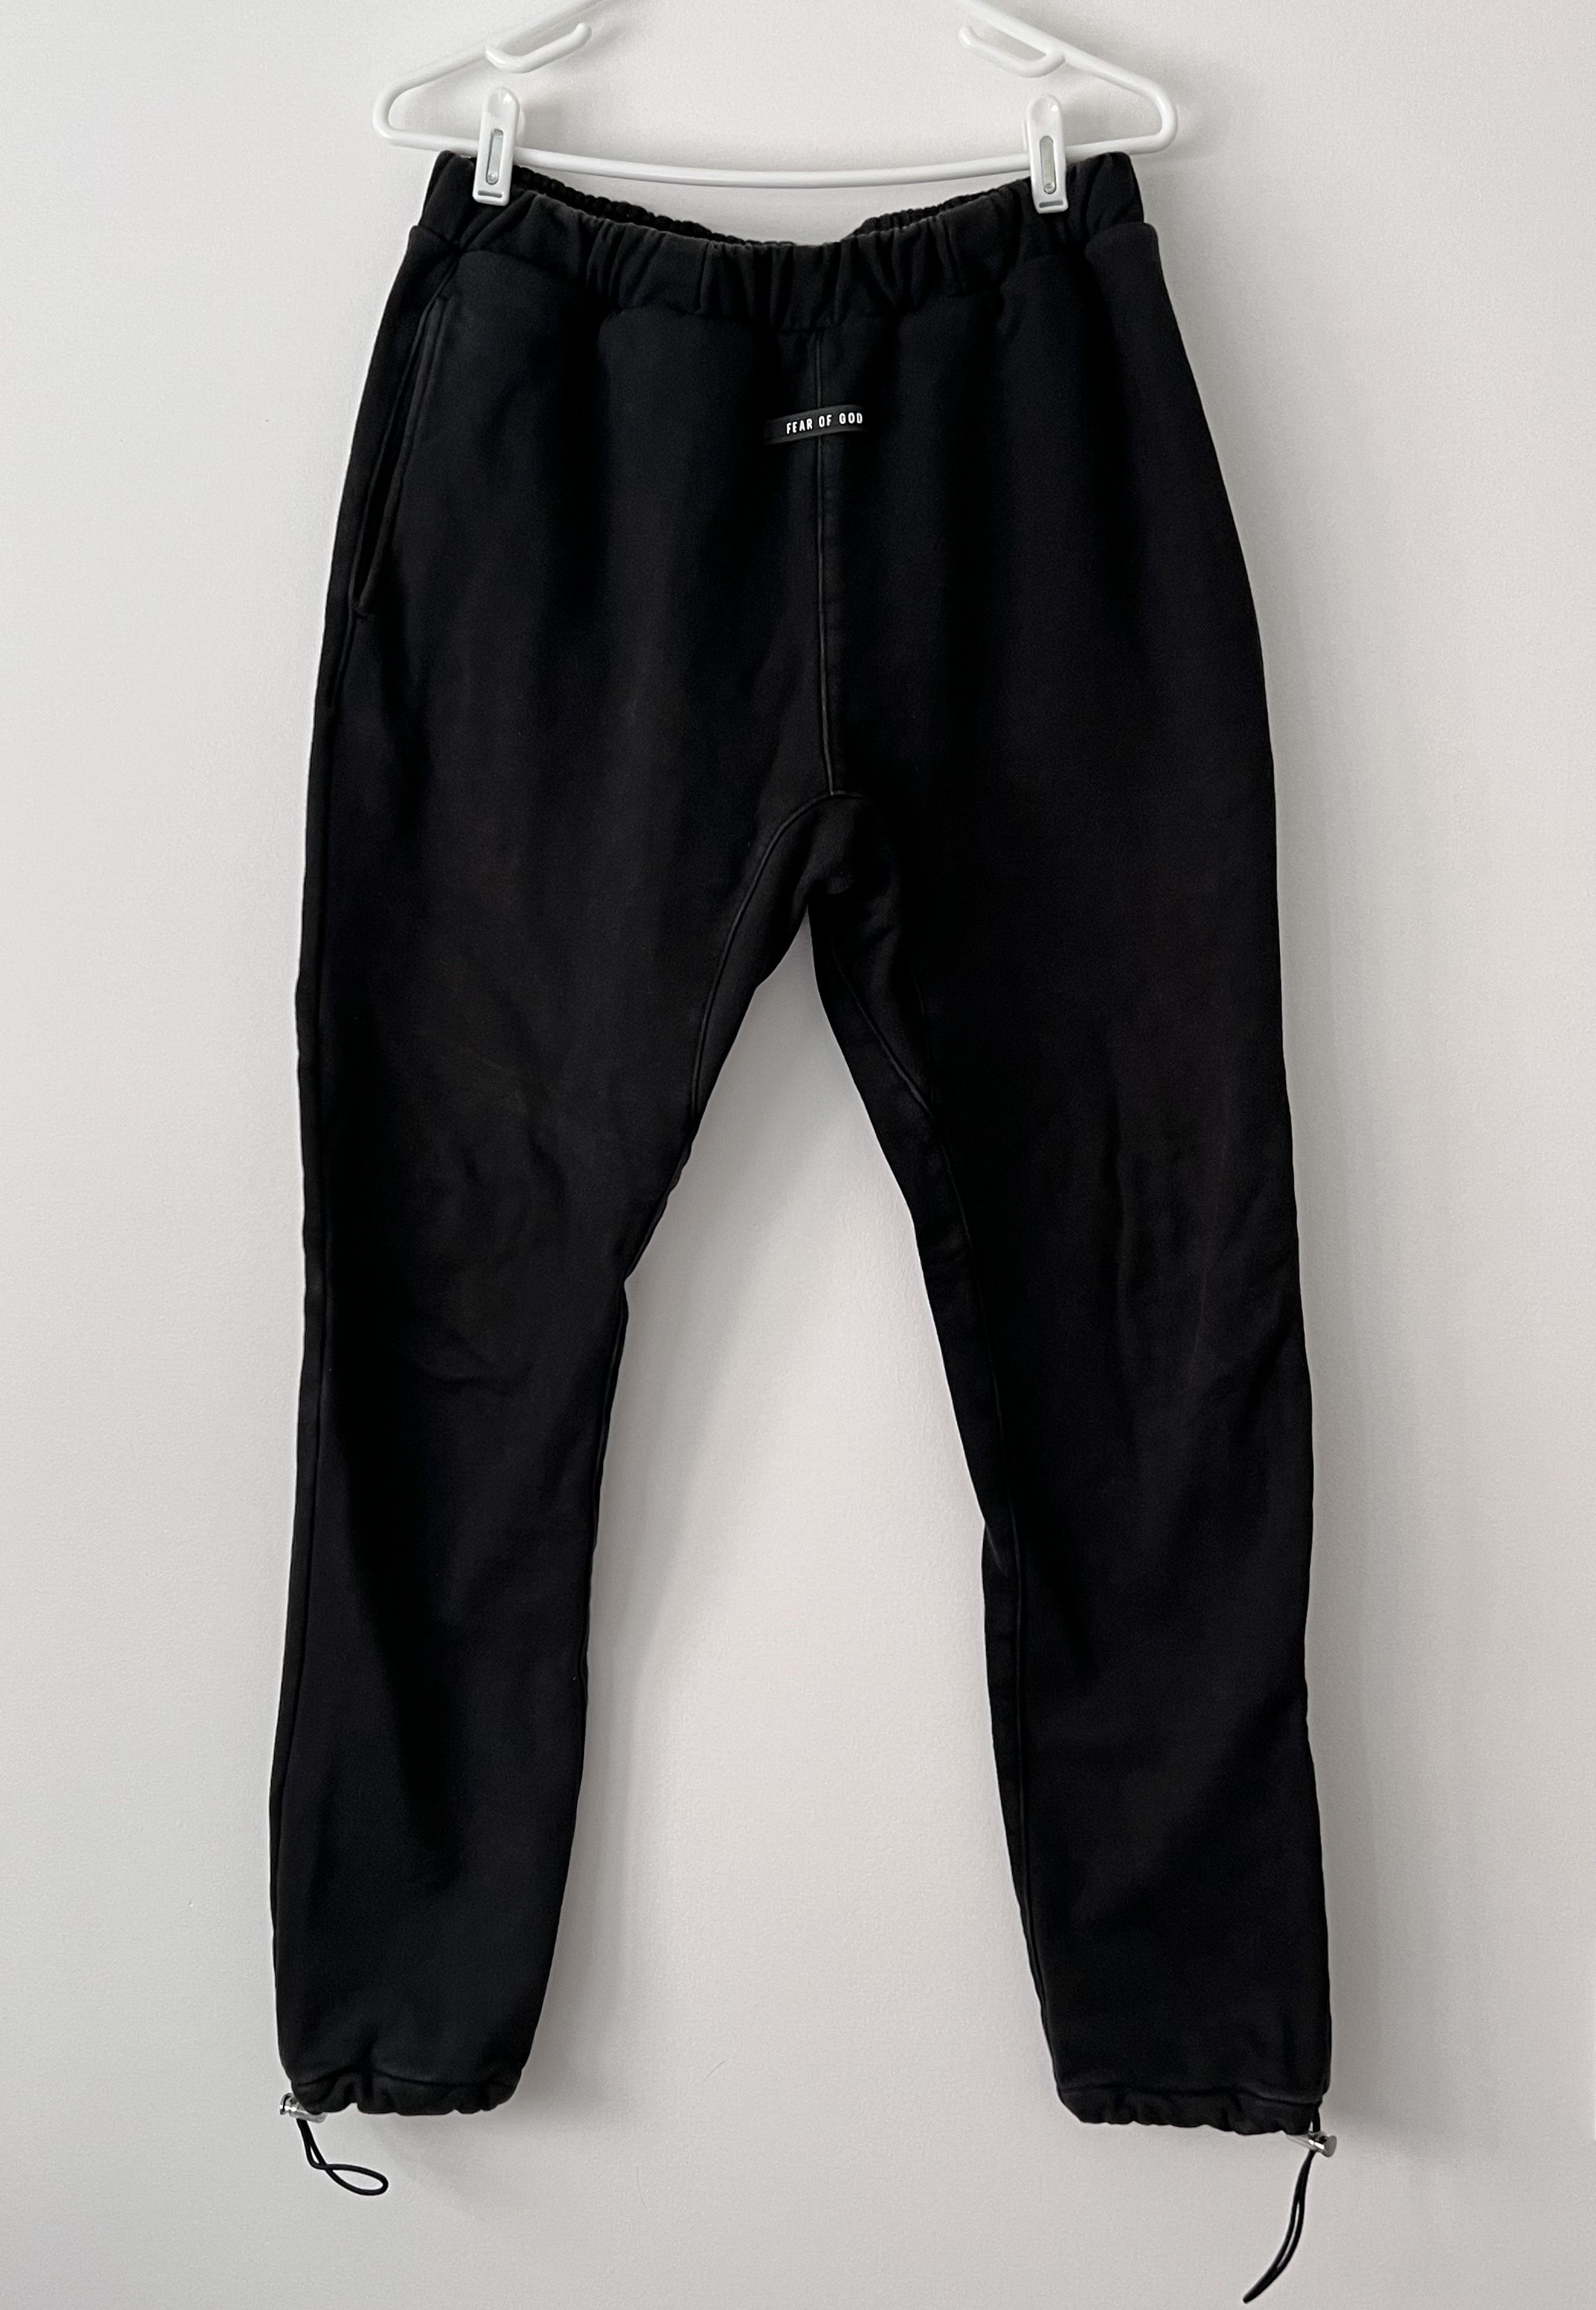 Fear of God Fear of God 6th Collection Sweatpants | Grailed